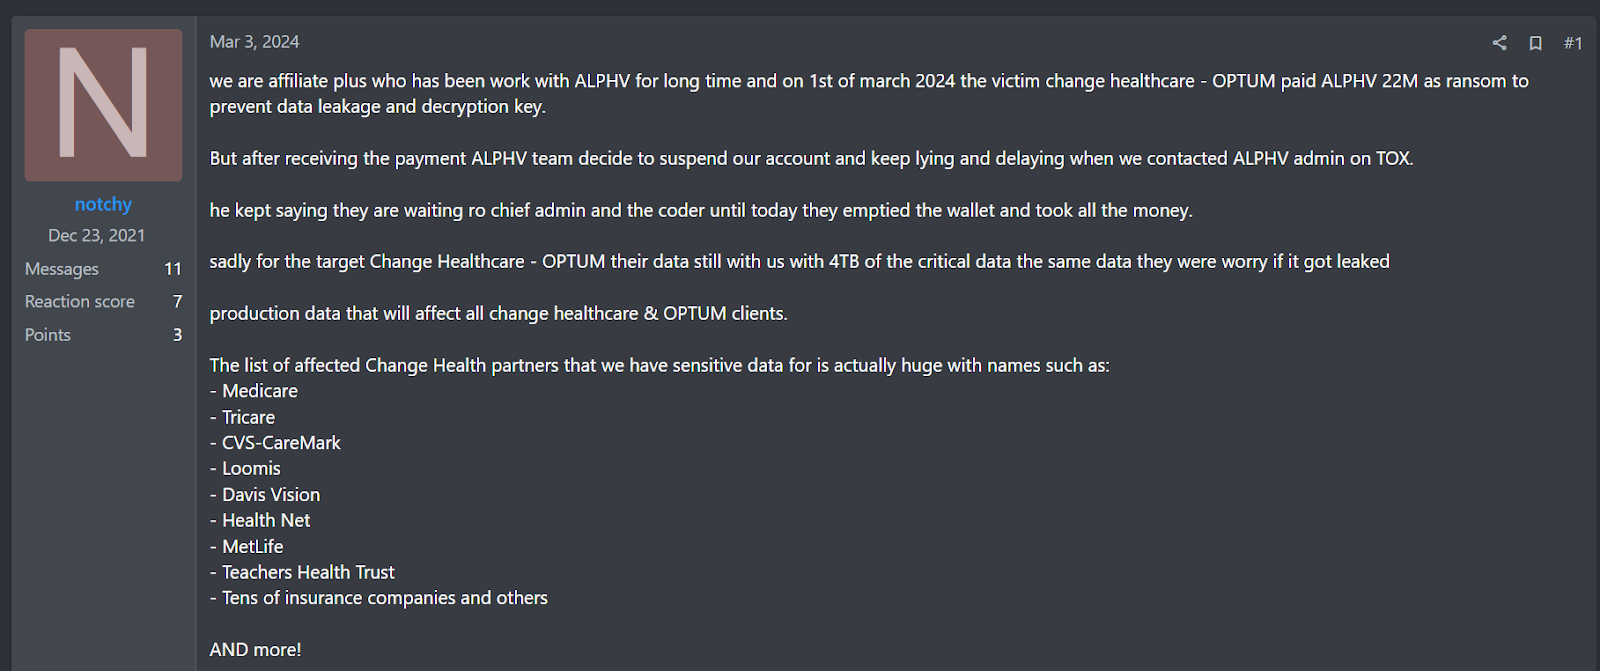 Chat logs exposing ALPHV's scam